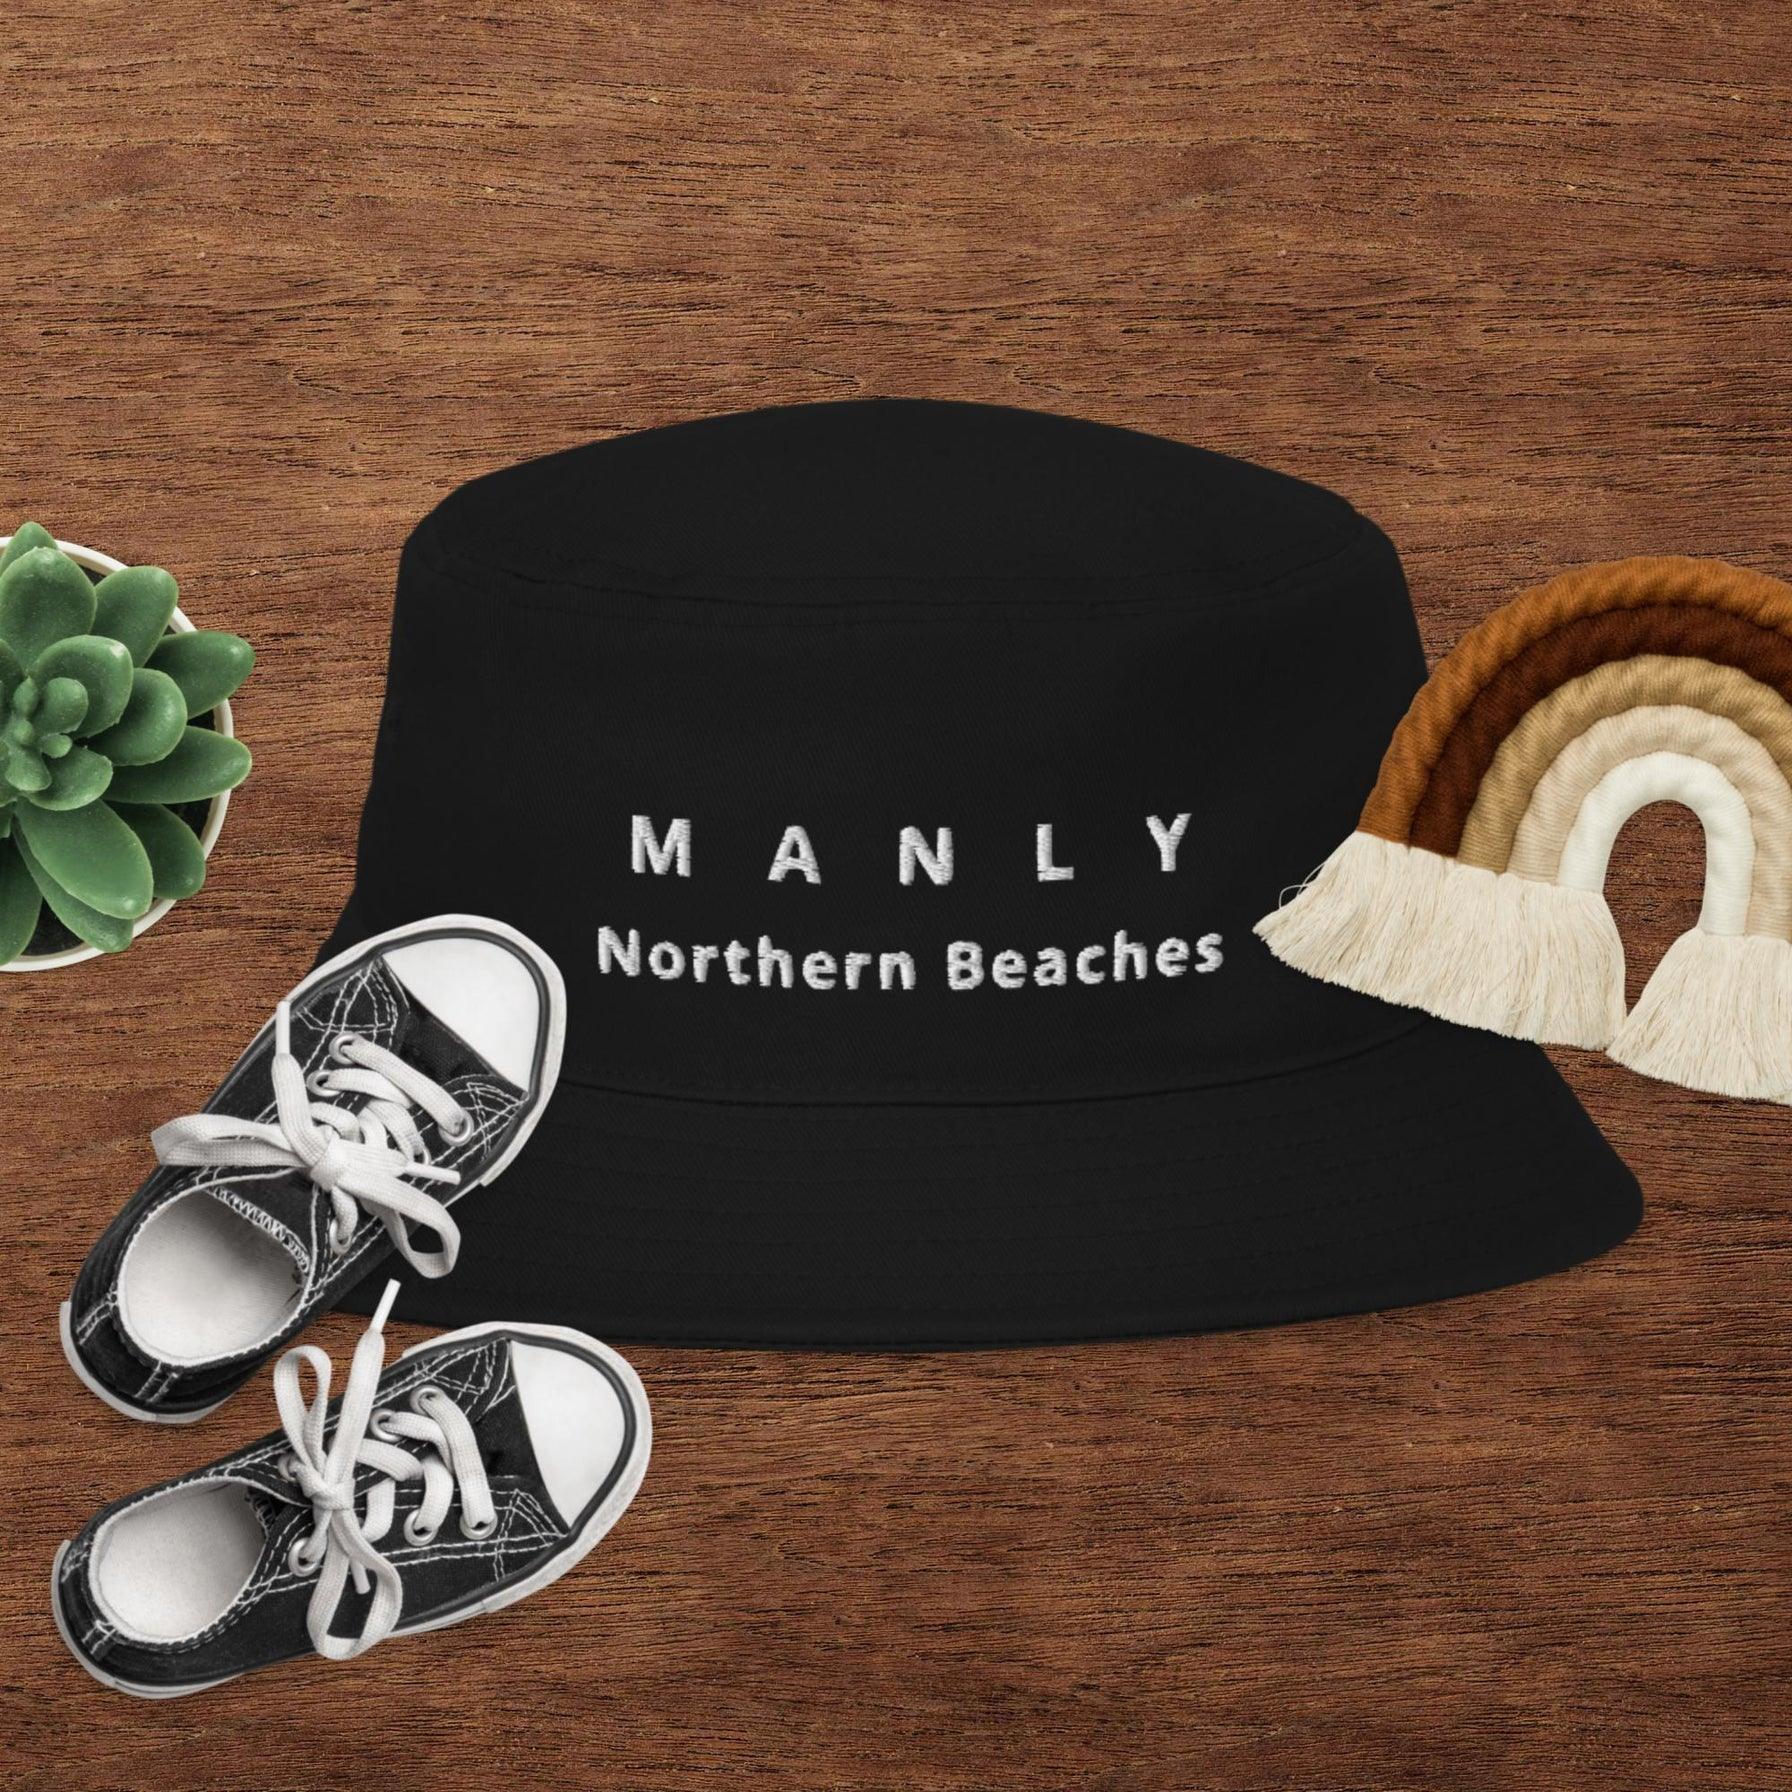 Hats with customised logo designs - Lost Manly Shop